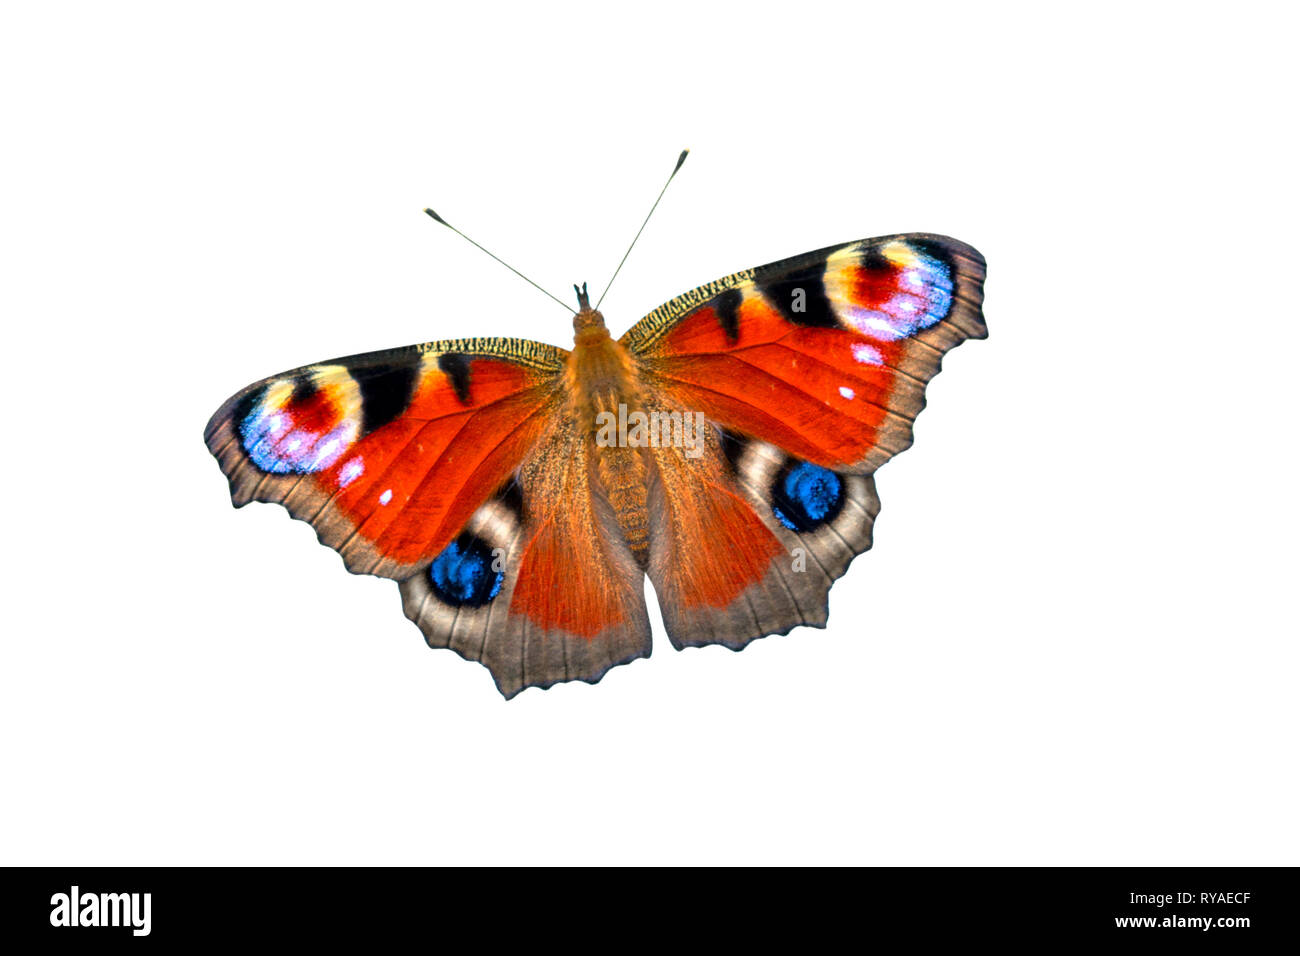 Beautiful colored butterfly on a white background. European Peacock butterfly (Inachis io) Stock Photo